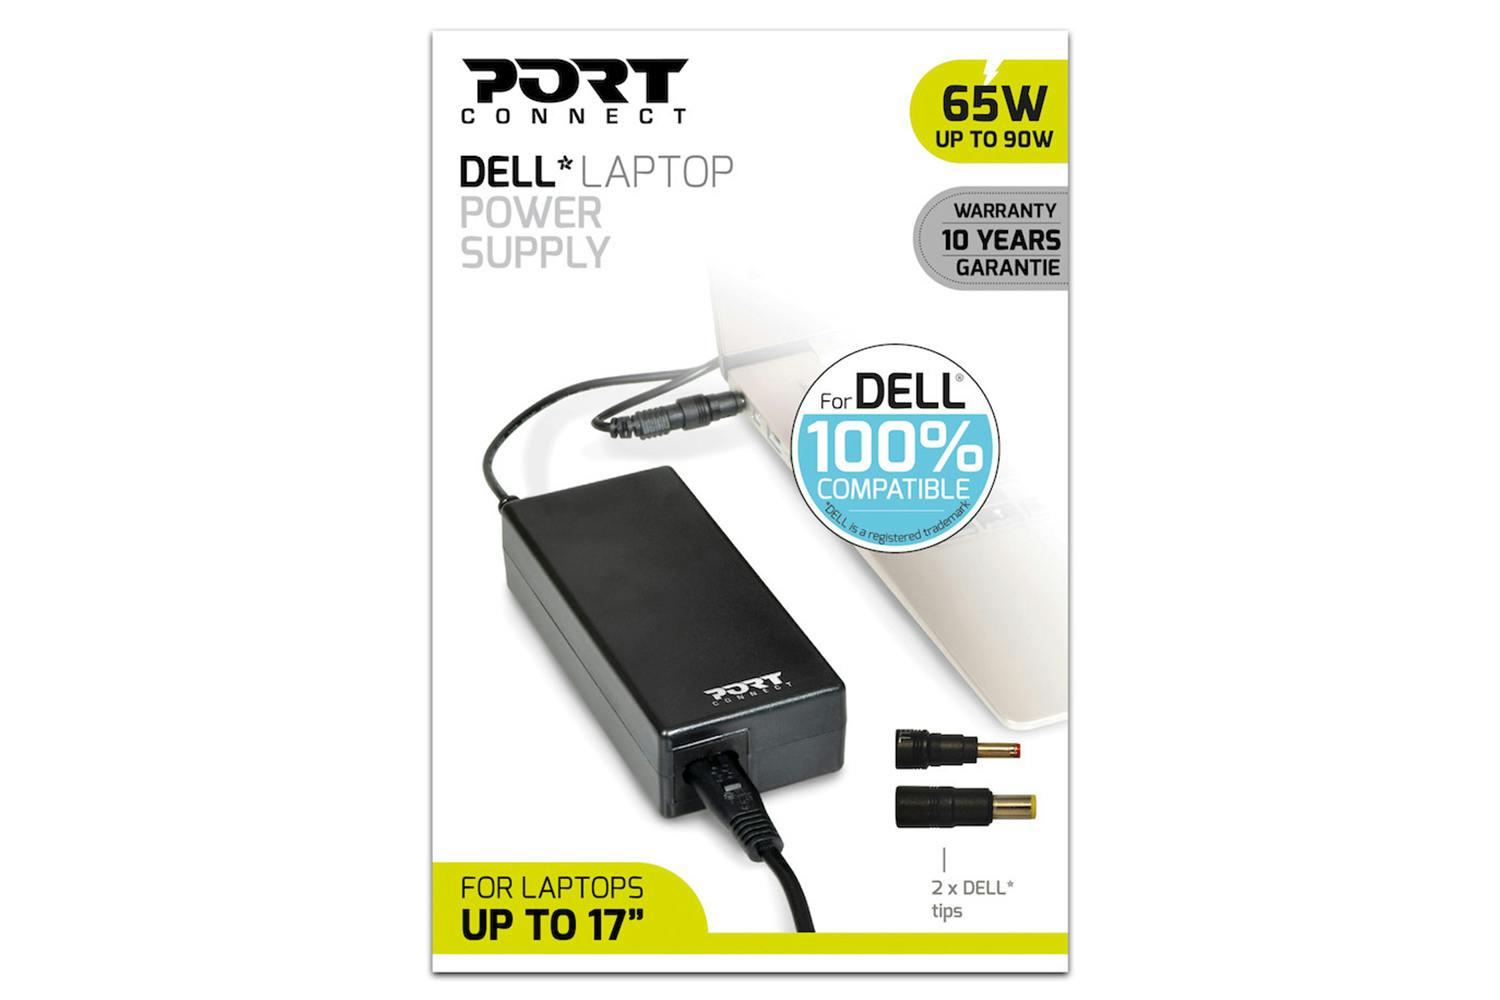 Port Designs 90W for Dell Laptop Power Supply